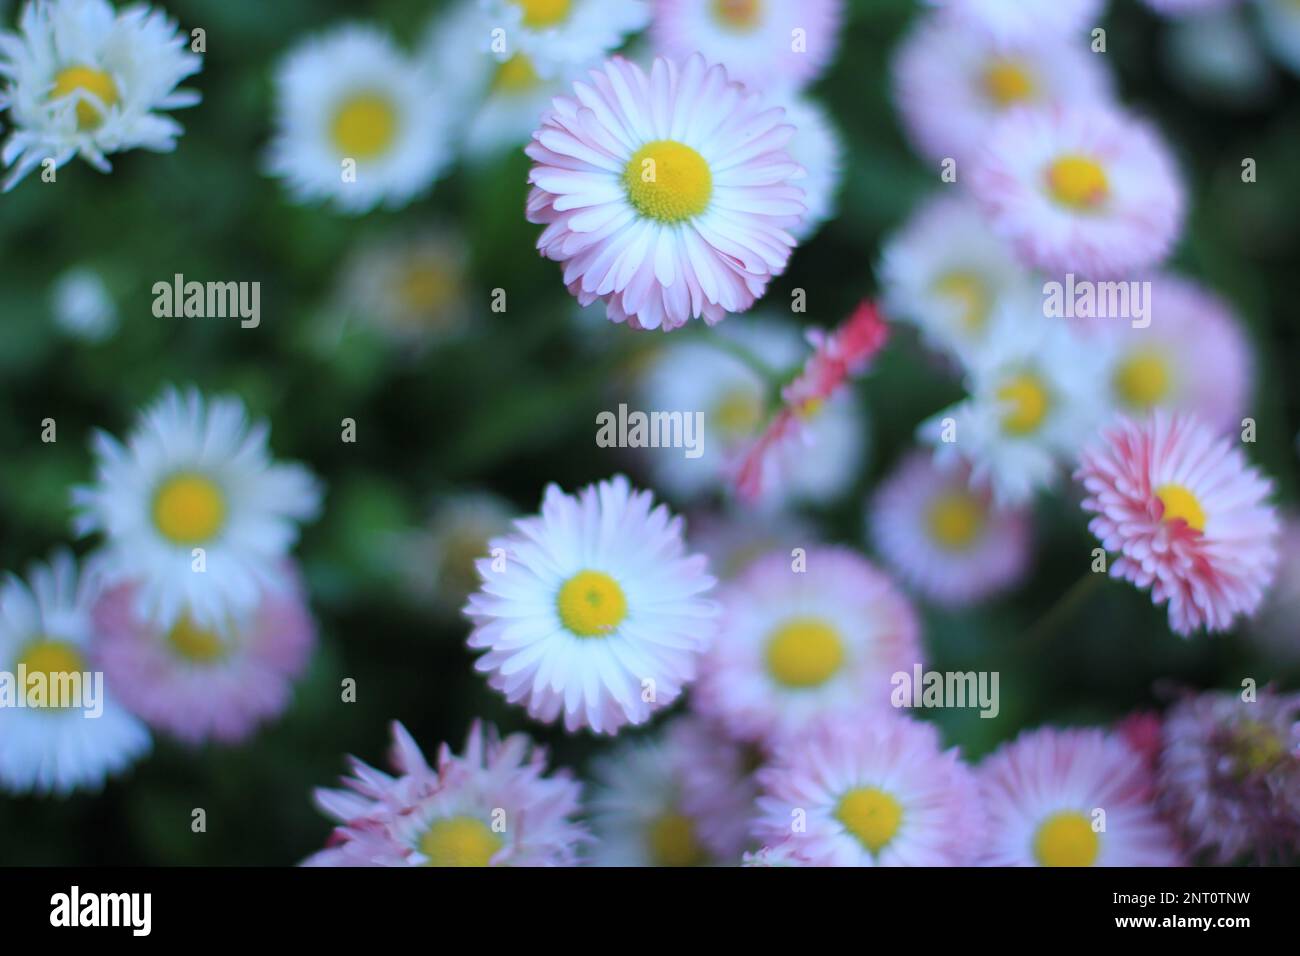 Daisy perennial flowers in a sunny garden , out of focus , blurred focus .Colorful pom-poms bloom. Spring nature background. Stock Photo